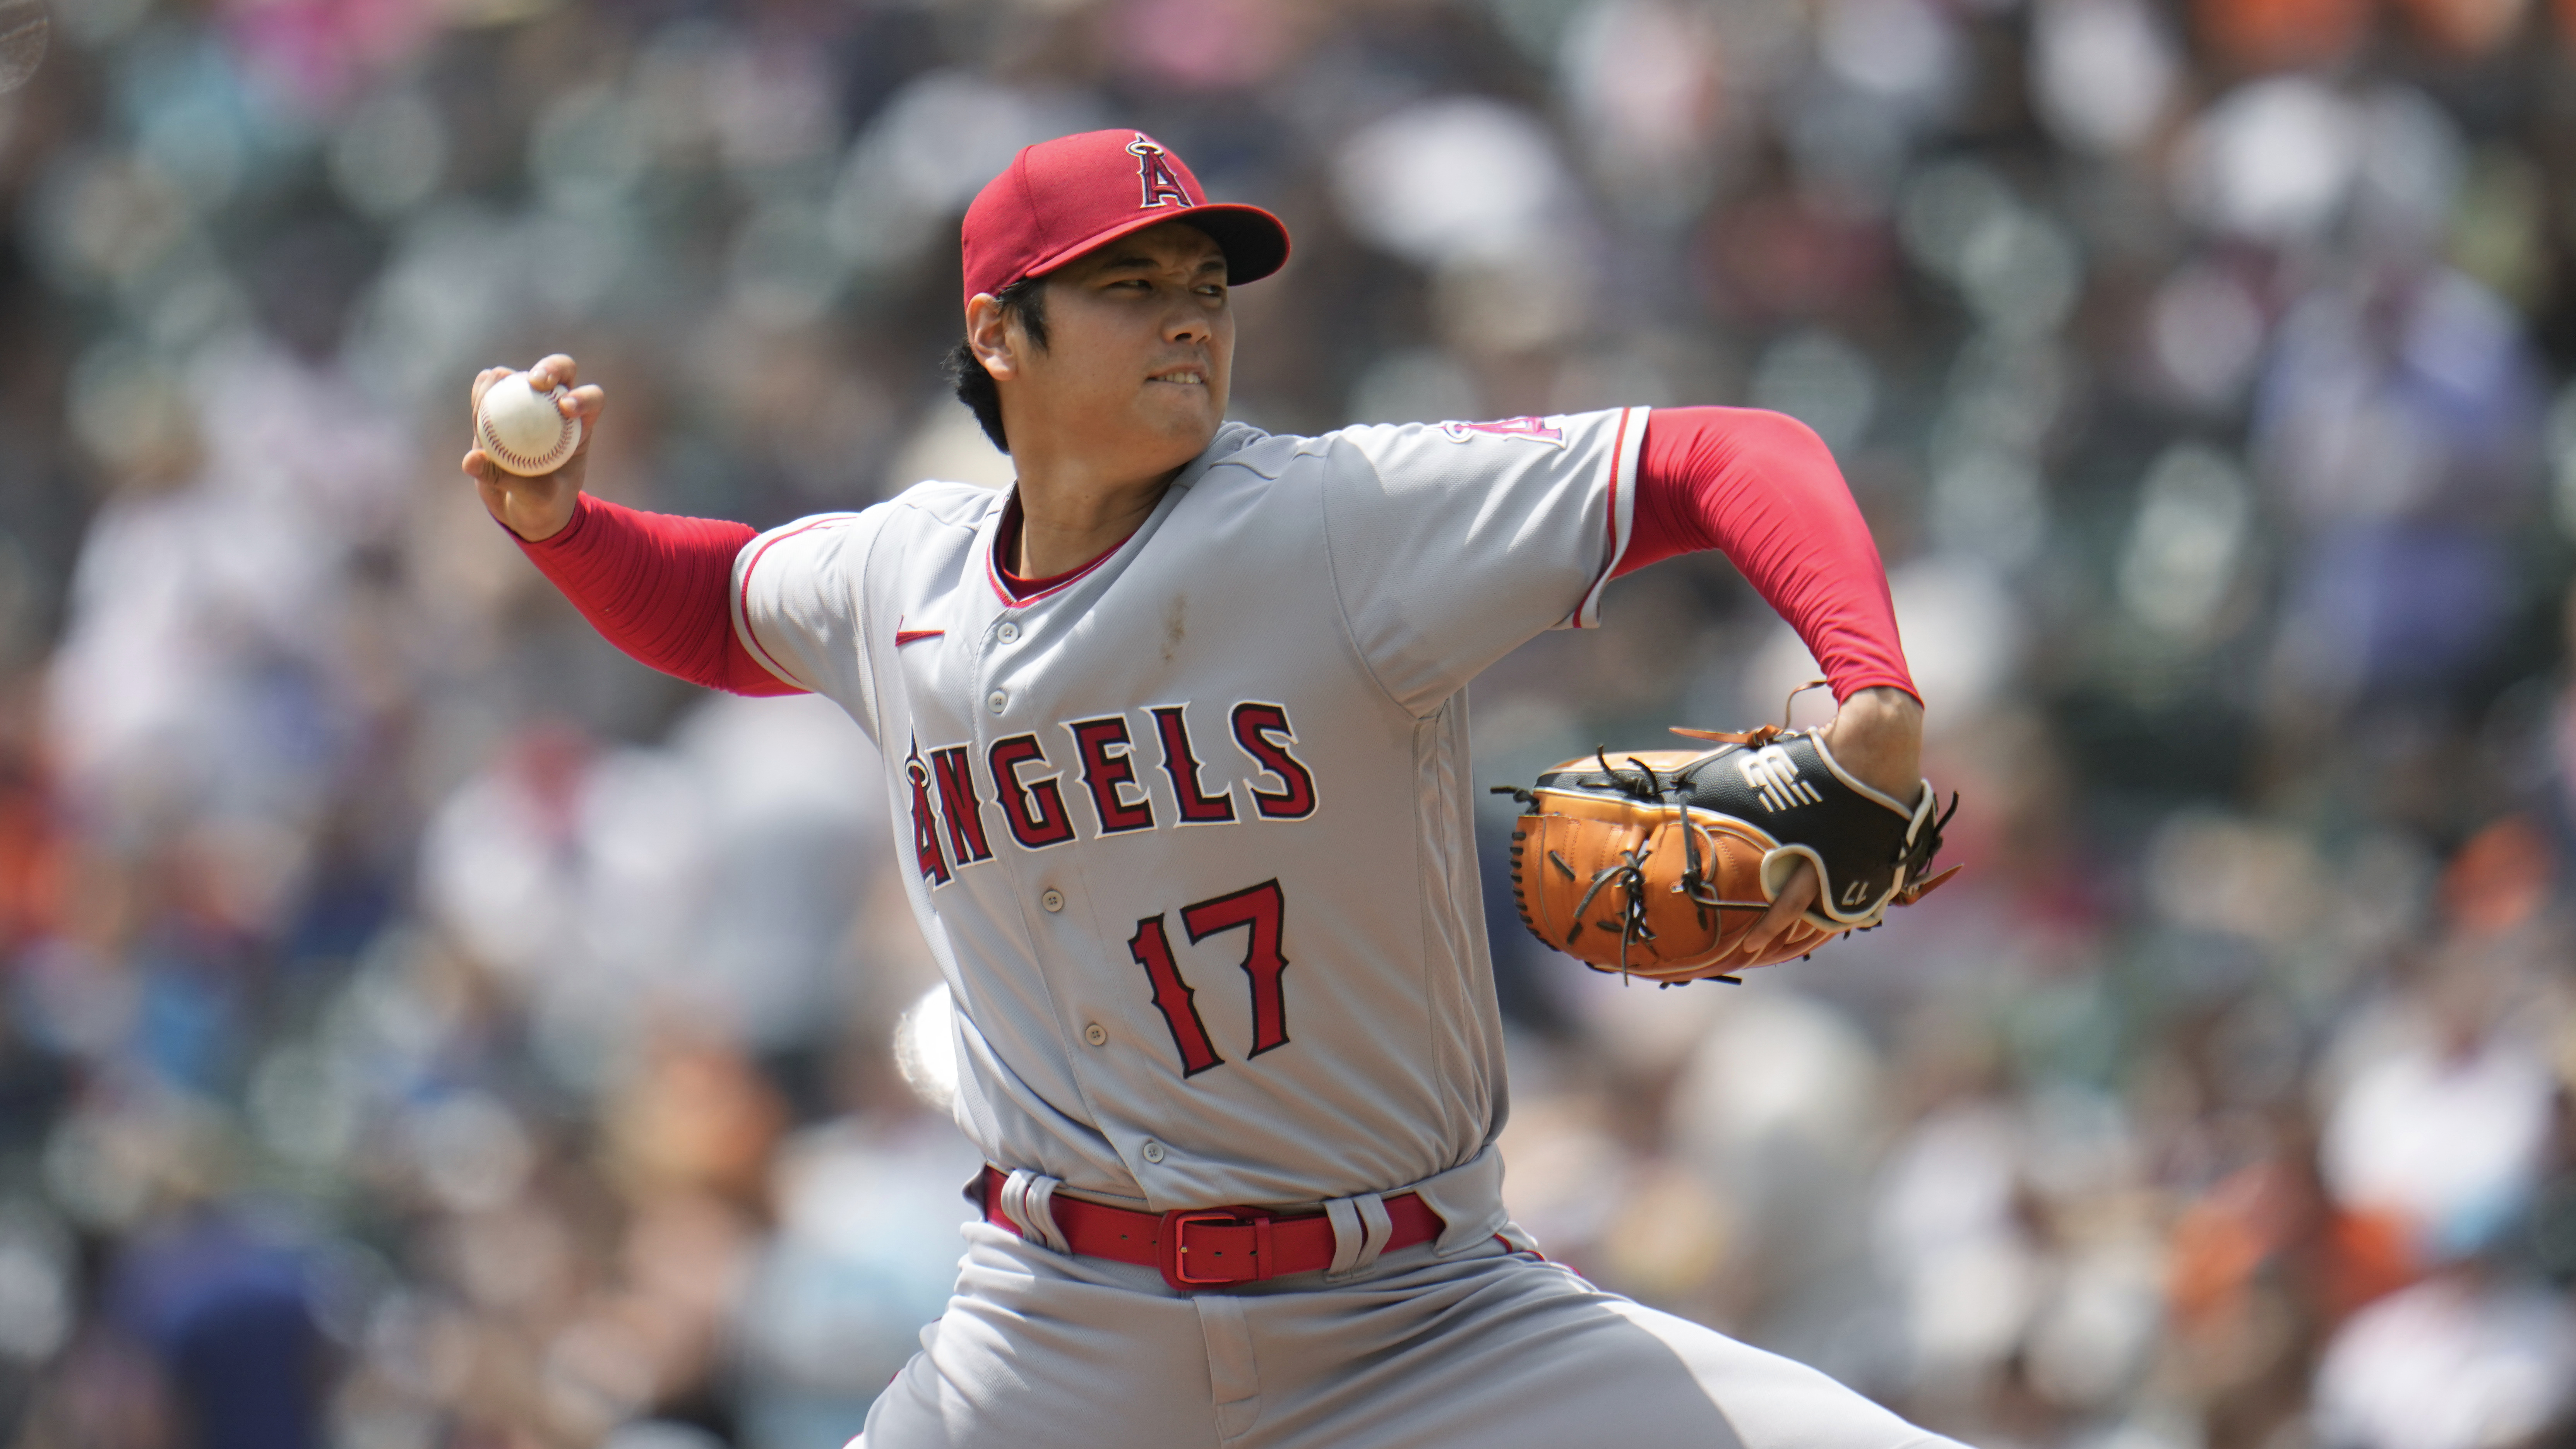 Shohei Ohtani delivers, wins MLB pitching debut